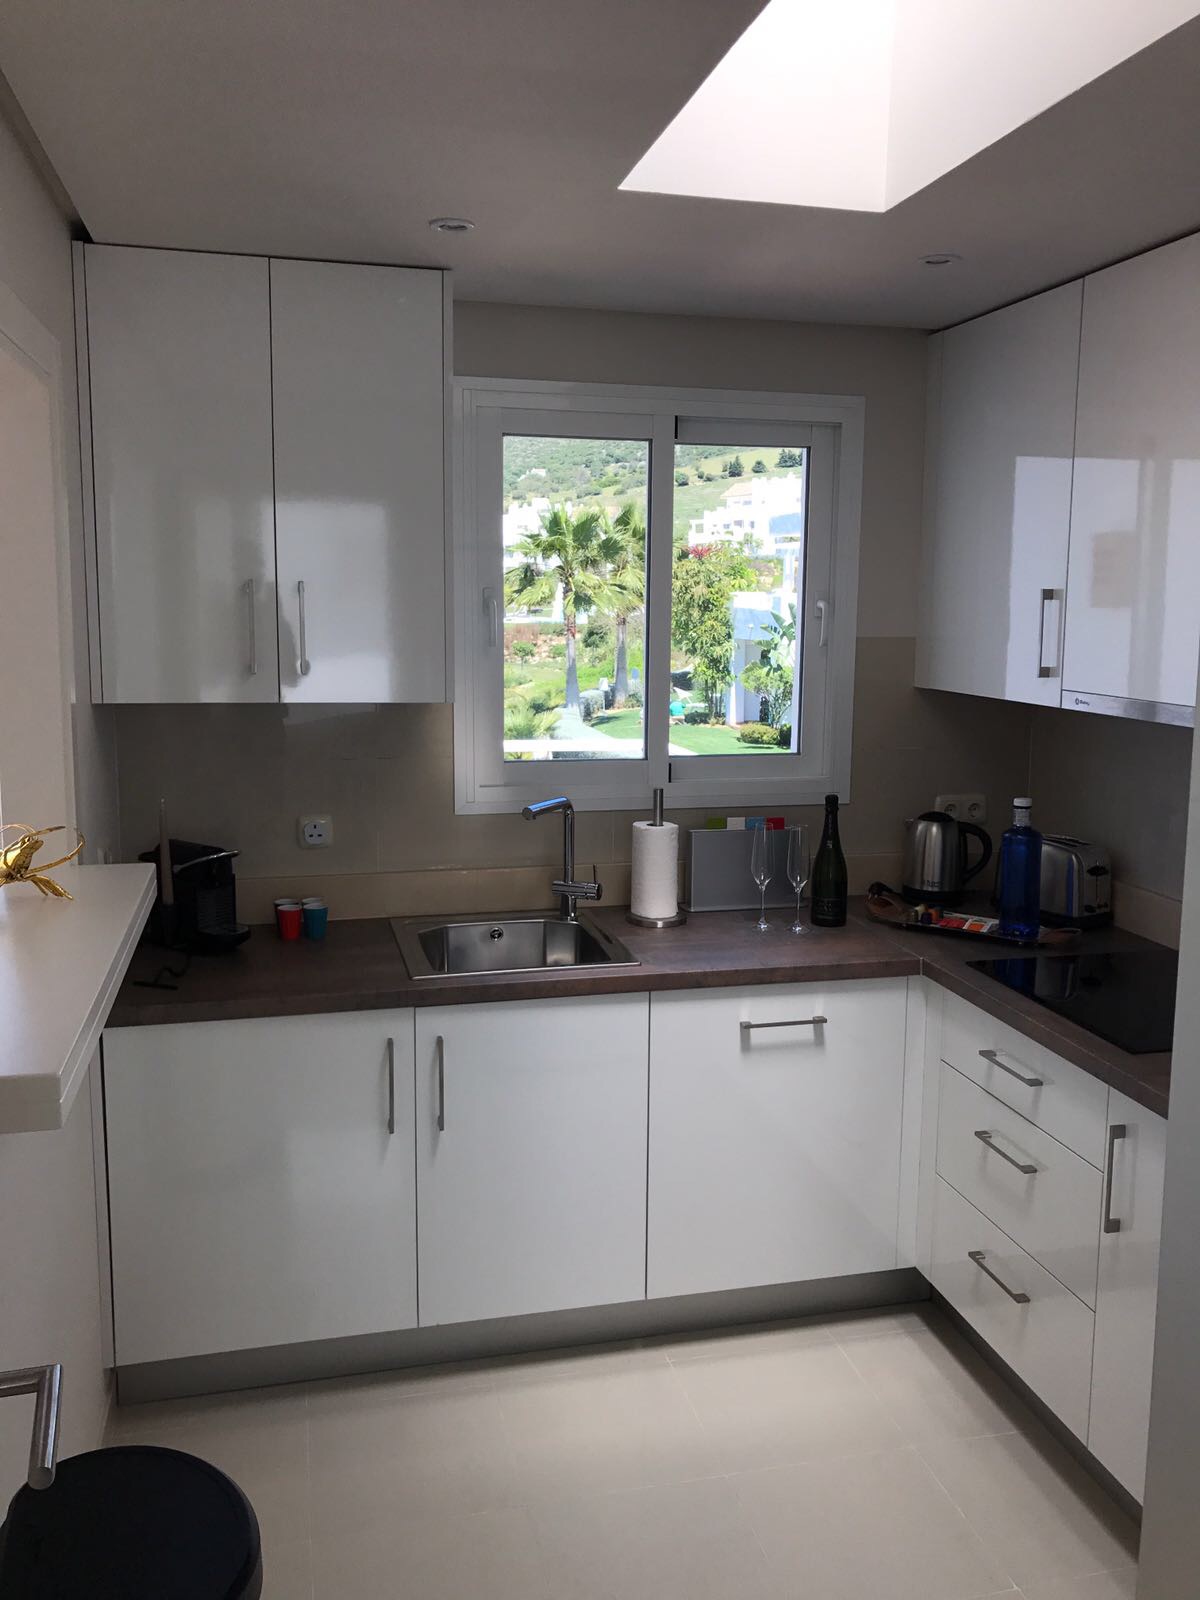 Image shows the recently refurbished kitchen of this stylish penthouse in Alcazaba Lagoon